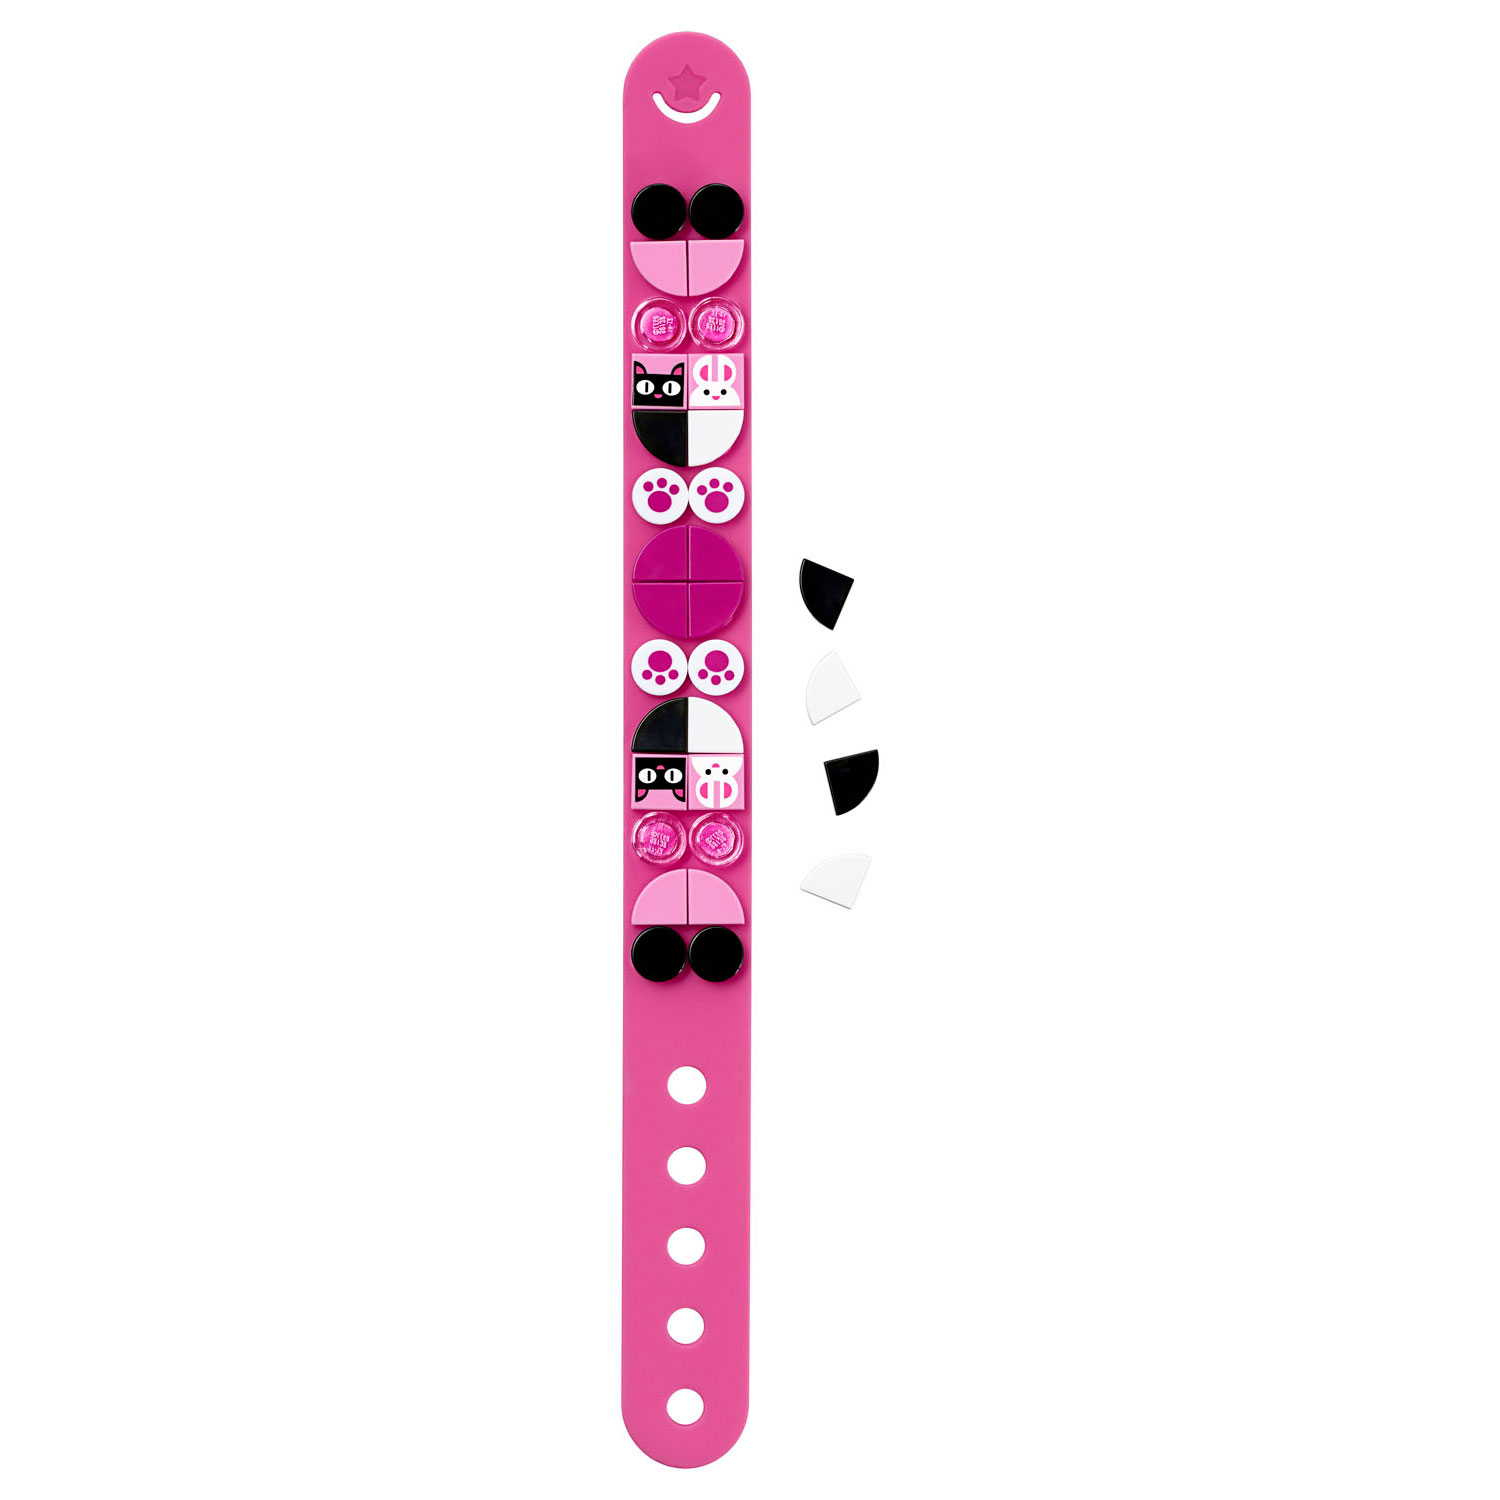 LEGO DOTS 41901 Funky Dieren Armband